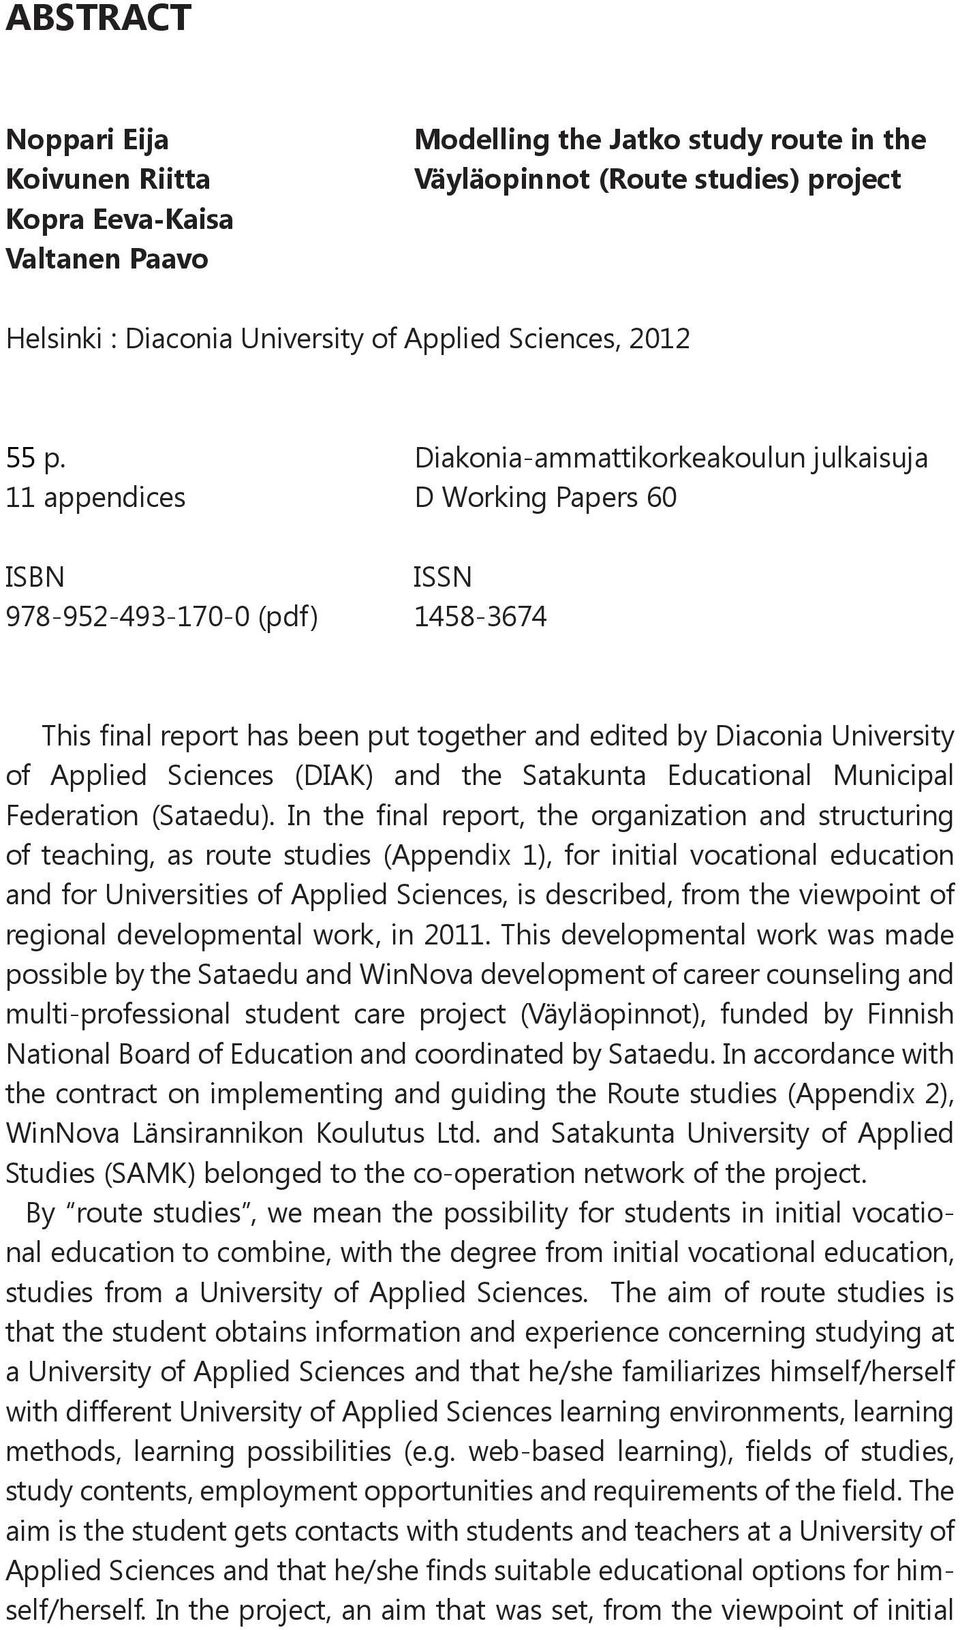 Diakonia-ammattikorkeakoulun julkaisuja 11 appendices D Working Papers 60 ISBN ISSN 978-952-493-170-0 (pdf) 1458-3674 This final report has been put together and edited by Diaconia University of